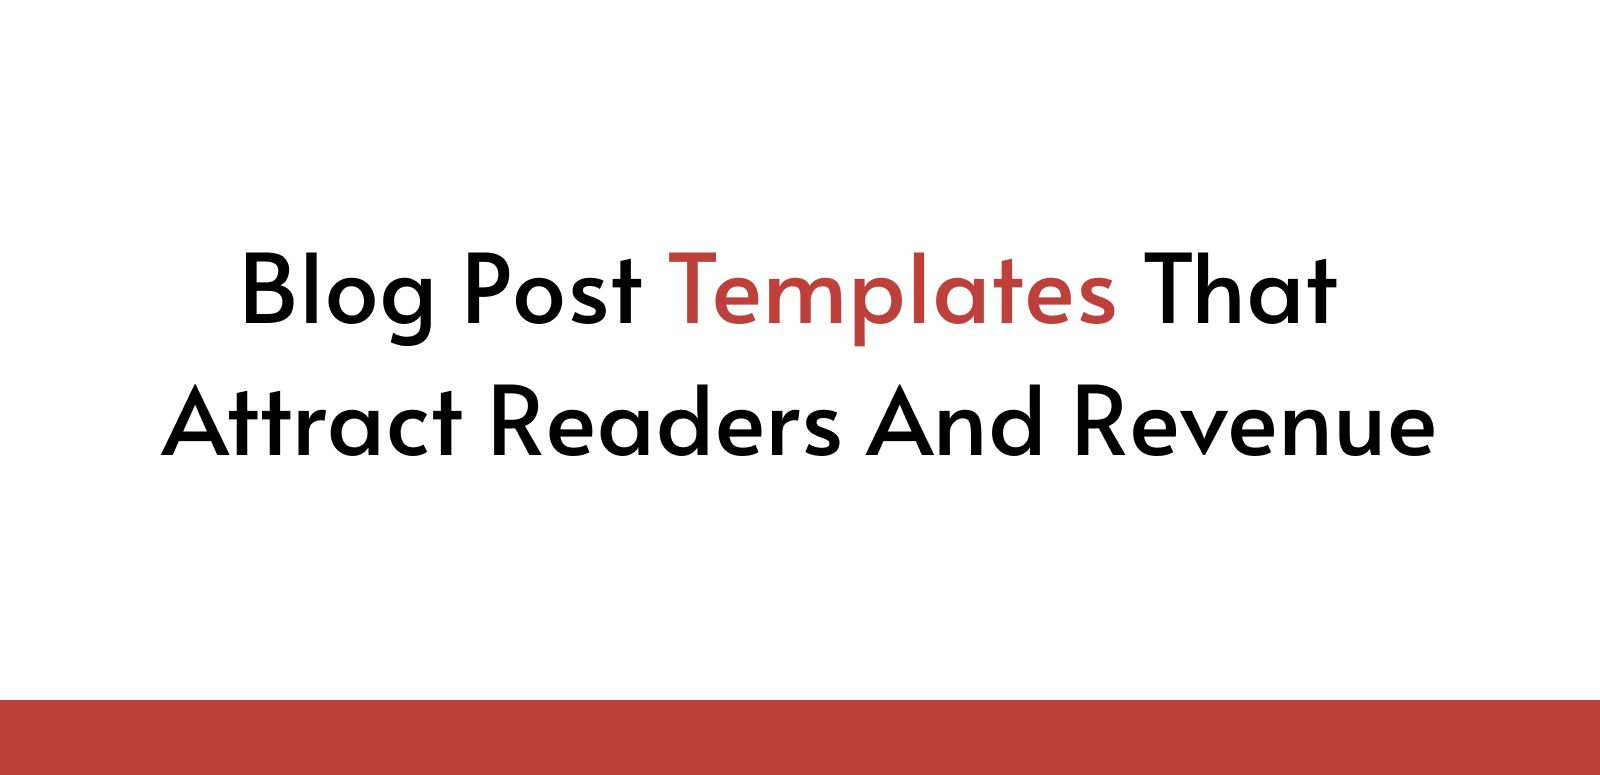 Blog Post Templates That Attract Readers And Revenue